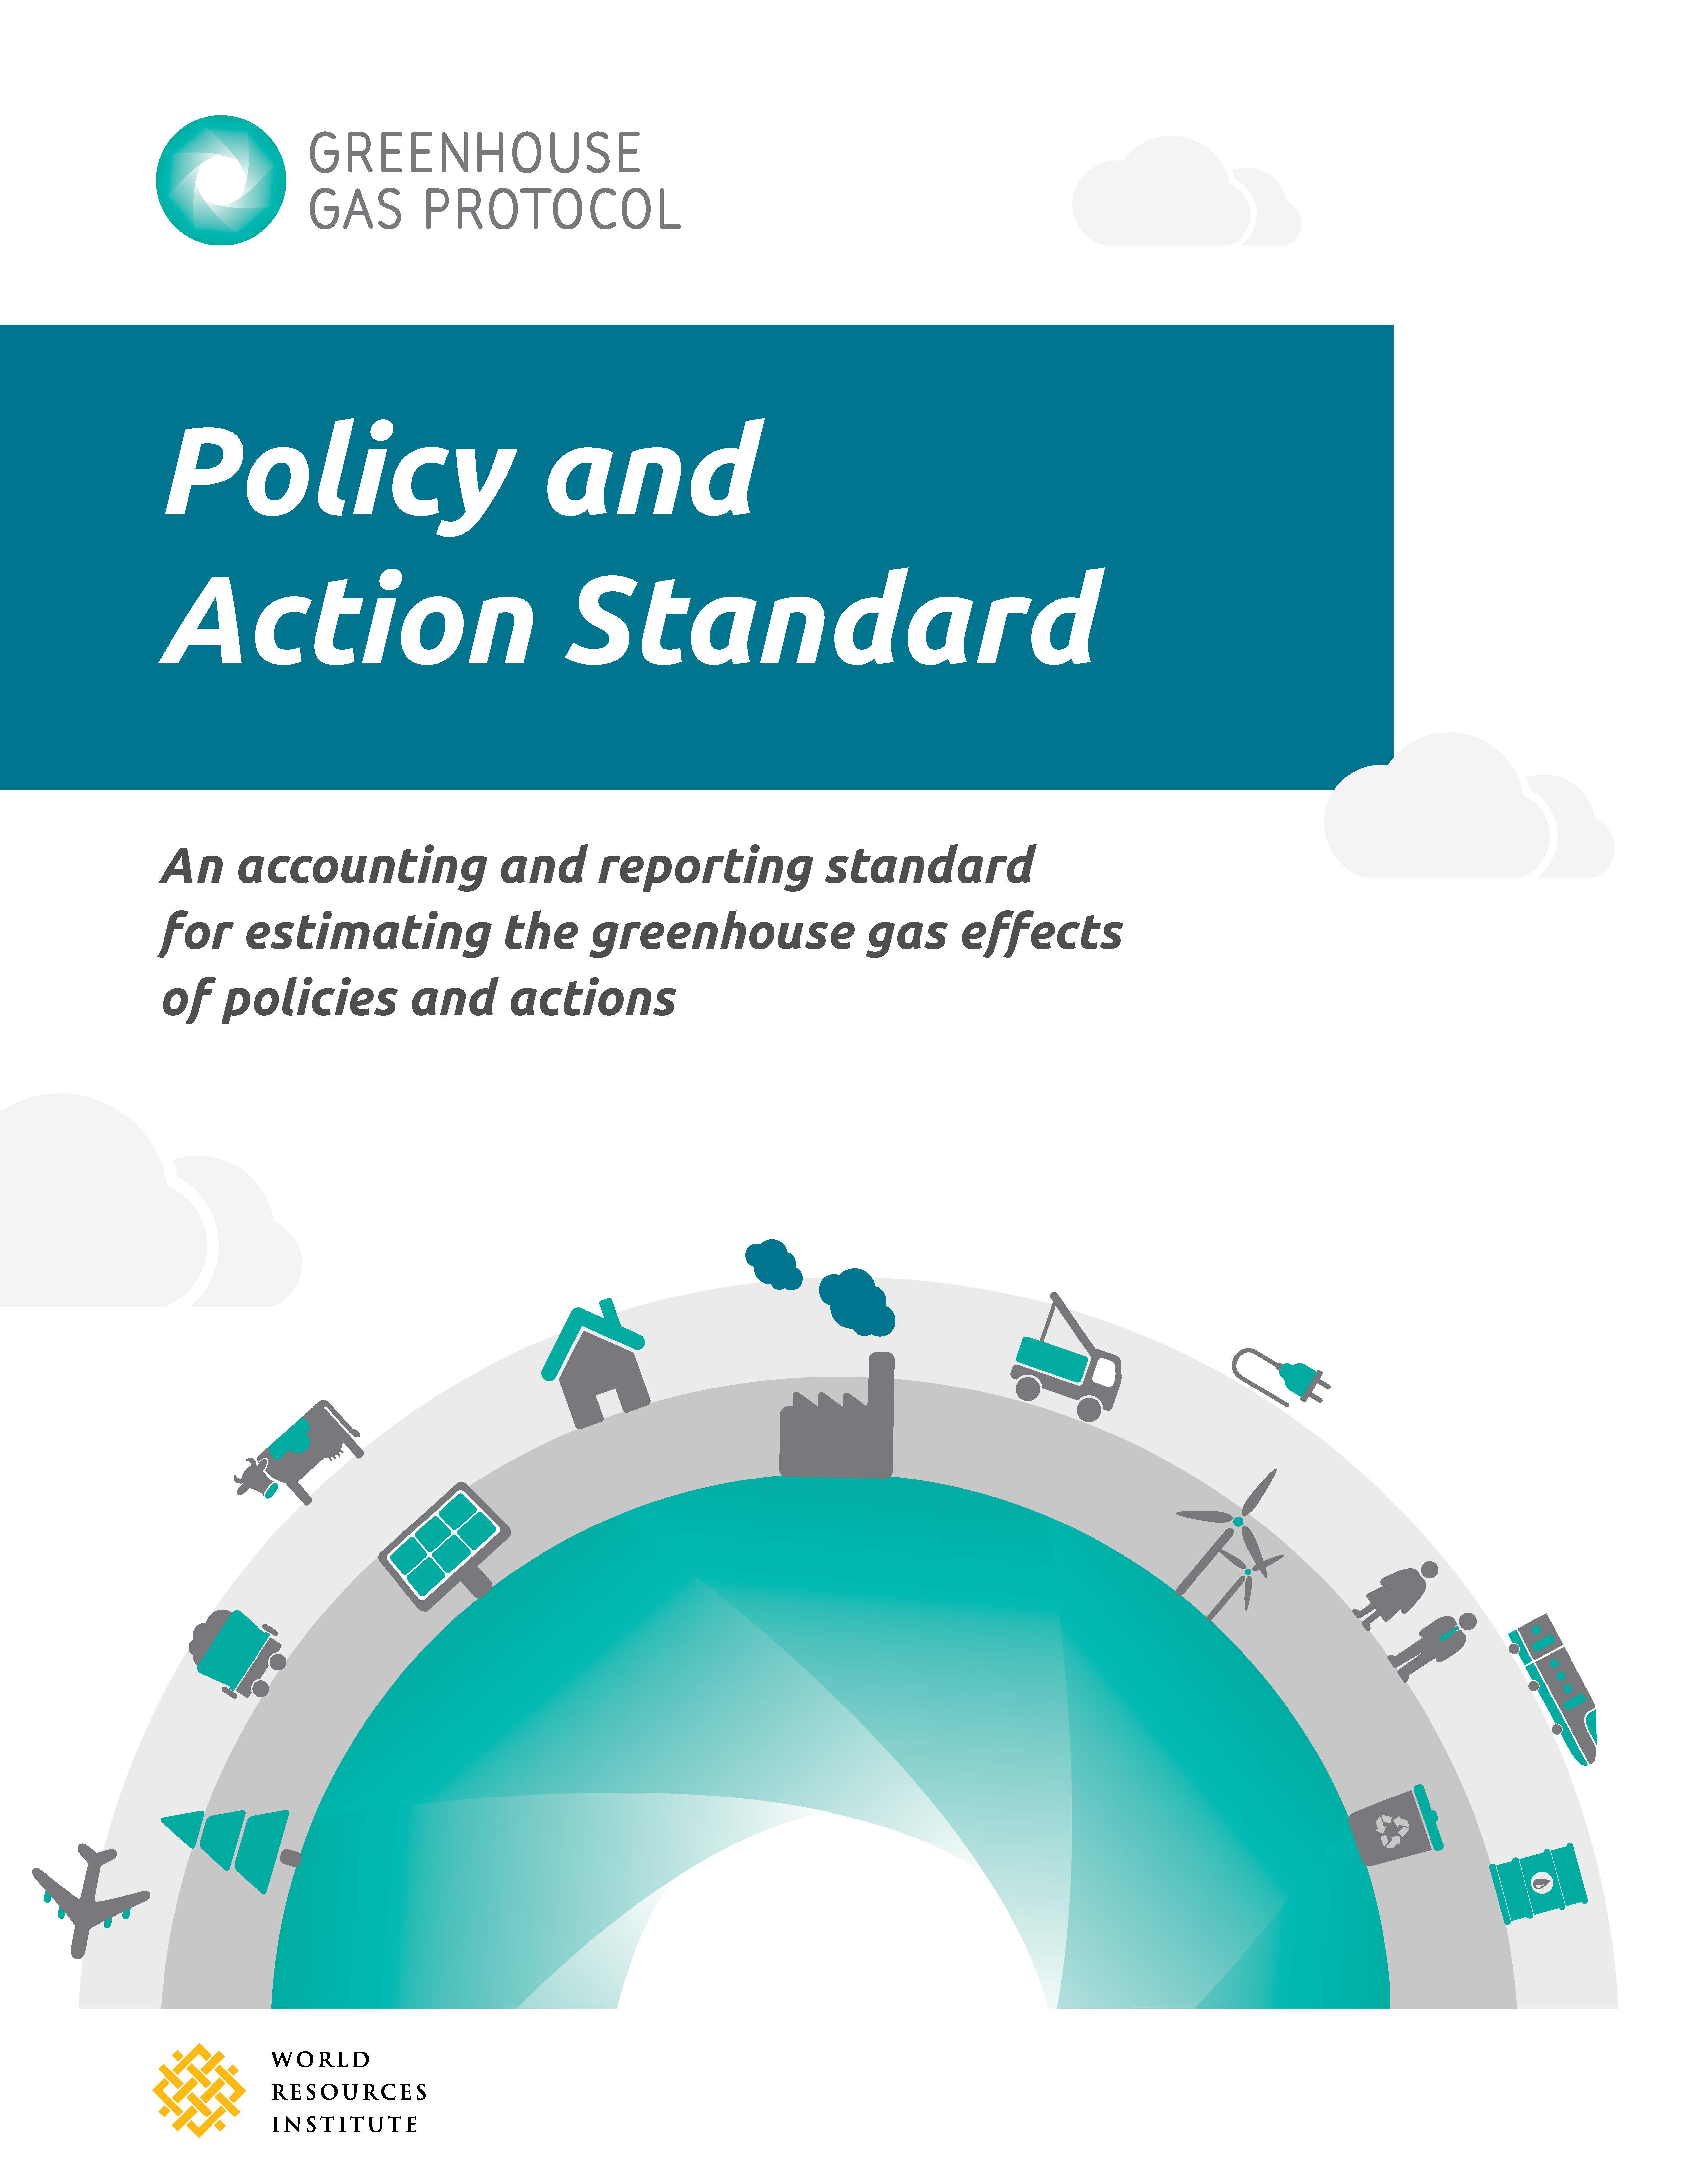 Policy and Action Standard: An Accounting and Reporting Standard for Estimating the Greenhouse Gas Effects of Policies and Actions